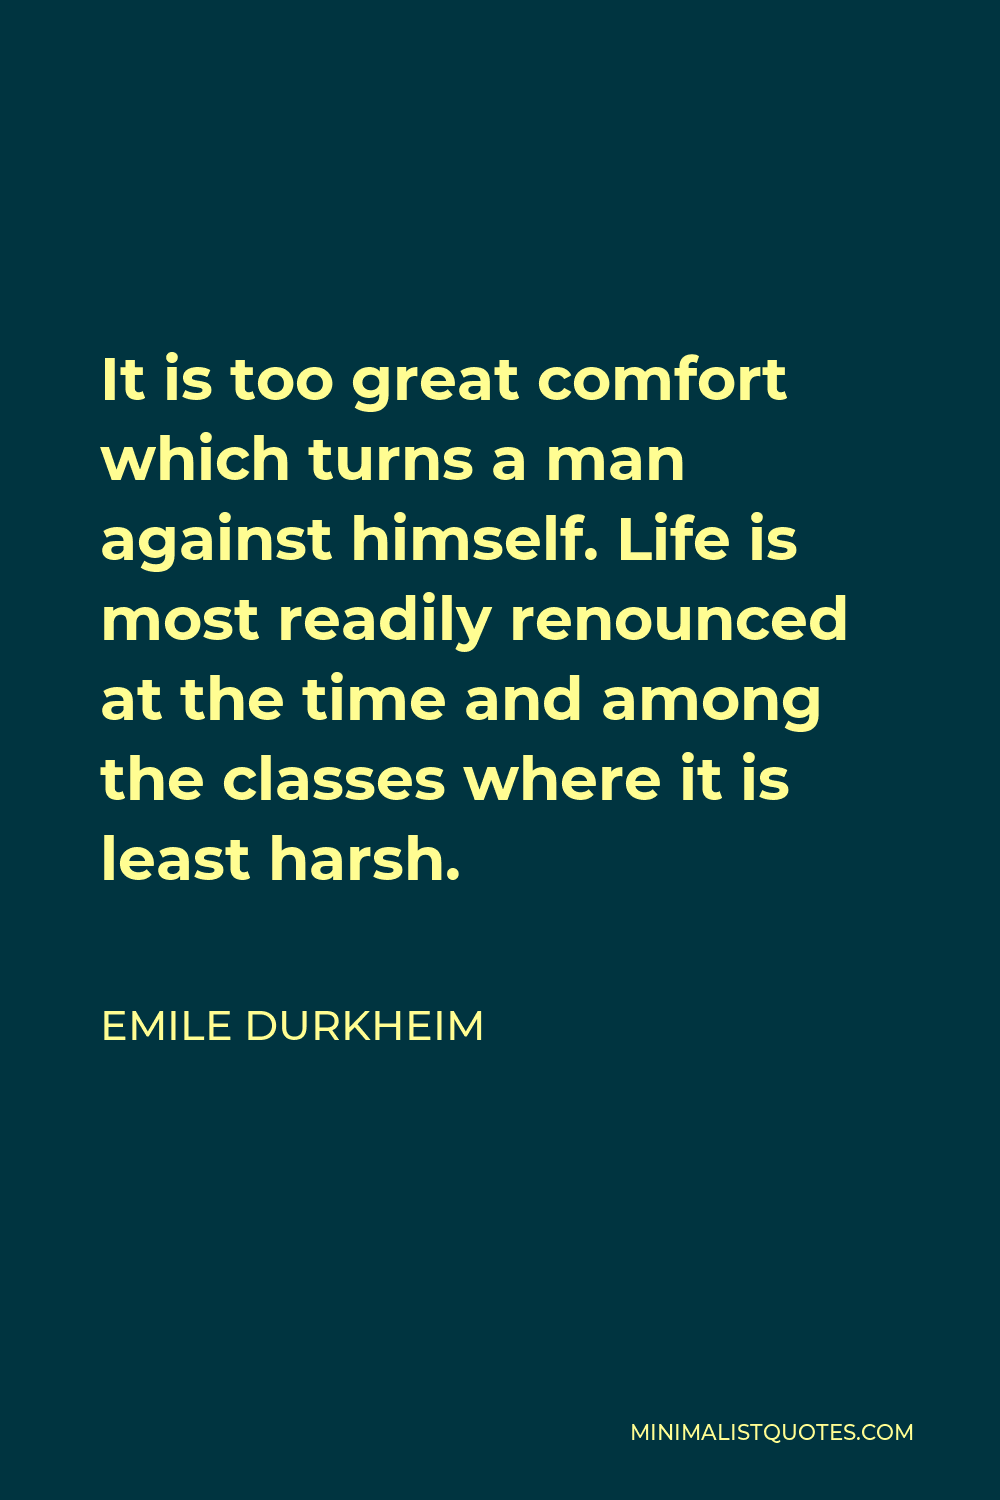 Emile Durkheim Quote - It is too great comfort which turns a man against himself. Life is most readily renounced at the time and among the classes where it is least harsh.